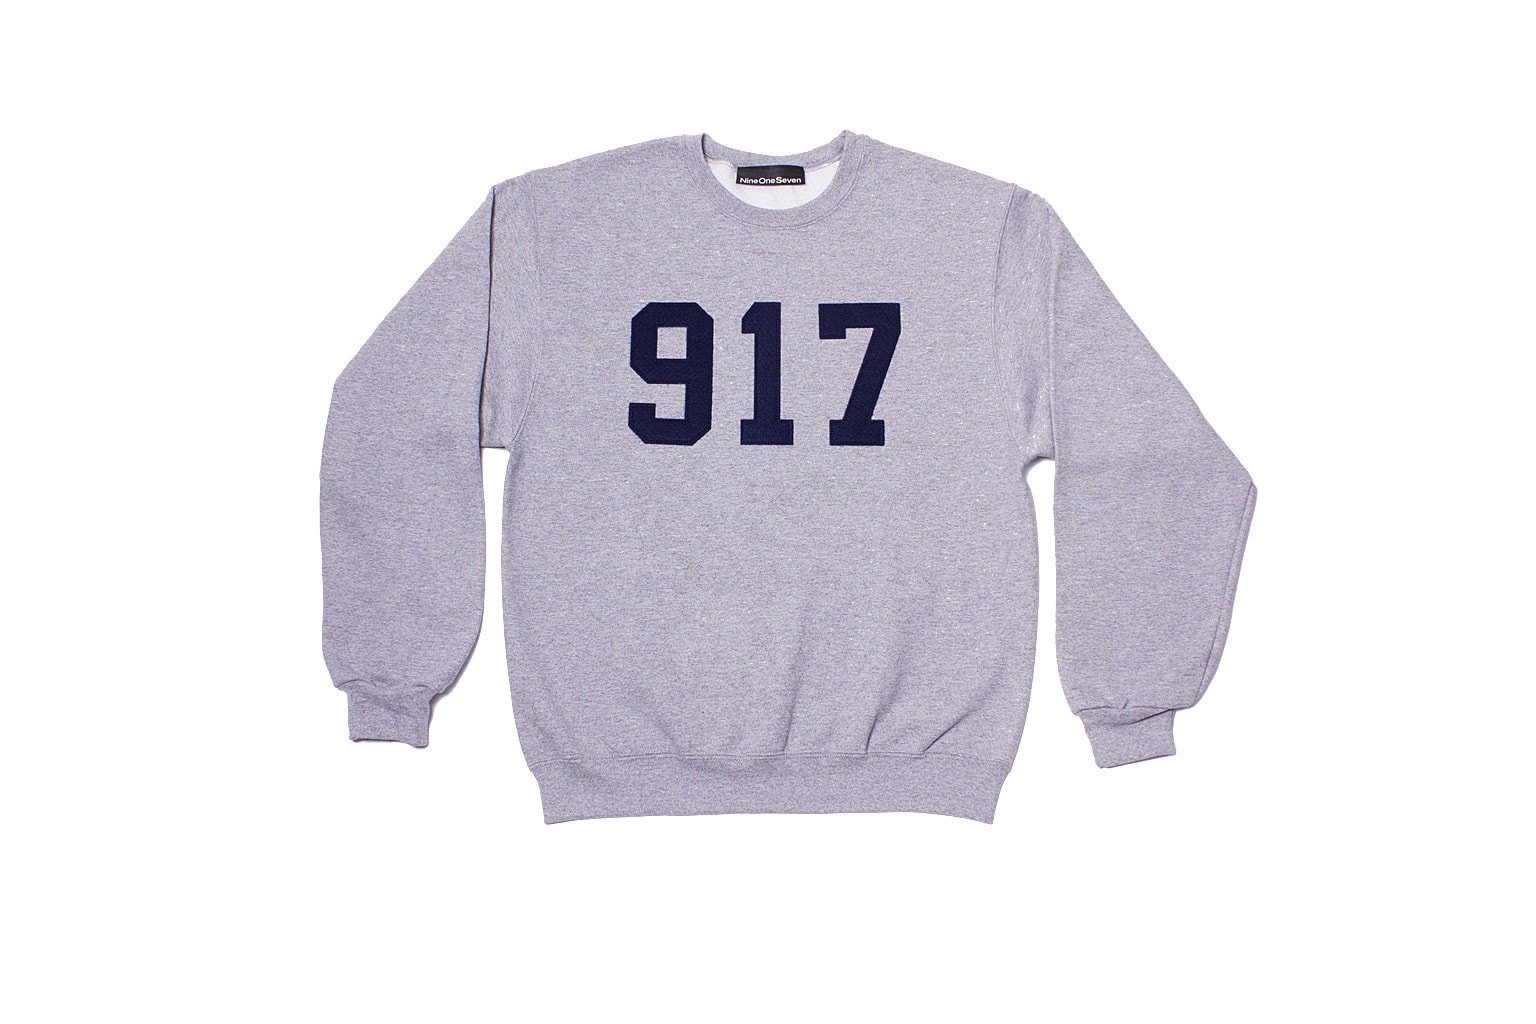 New Call Me 917 Items At Dover Street Market